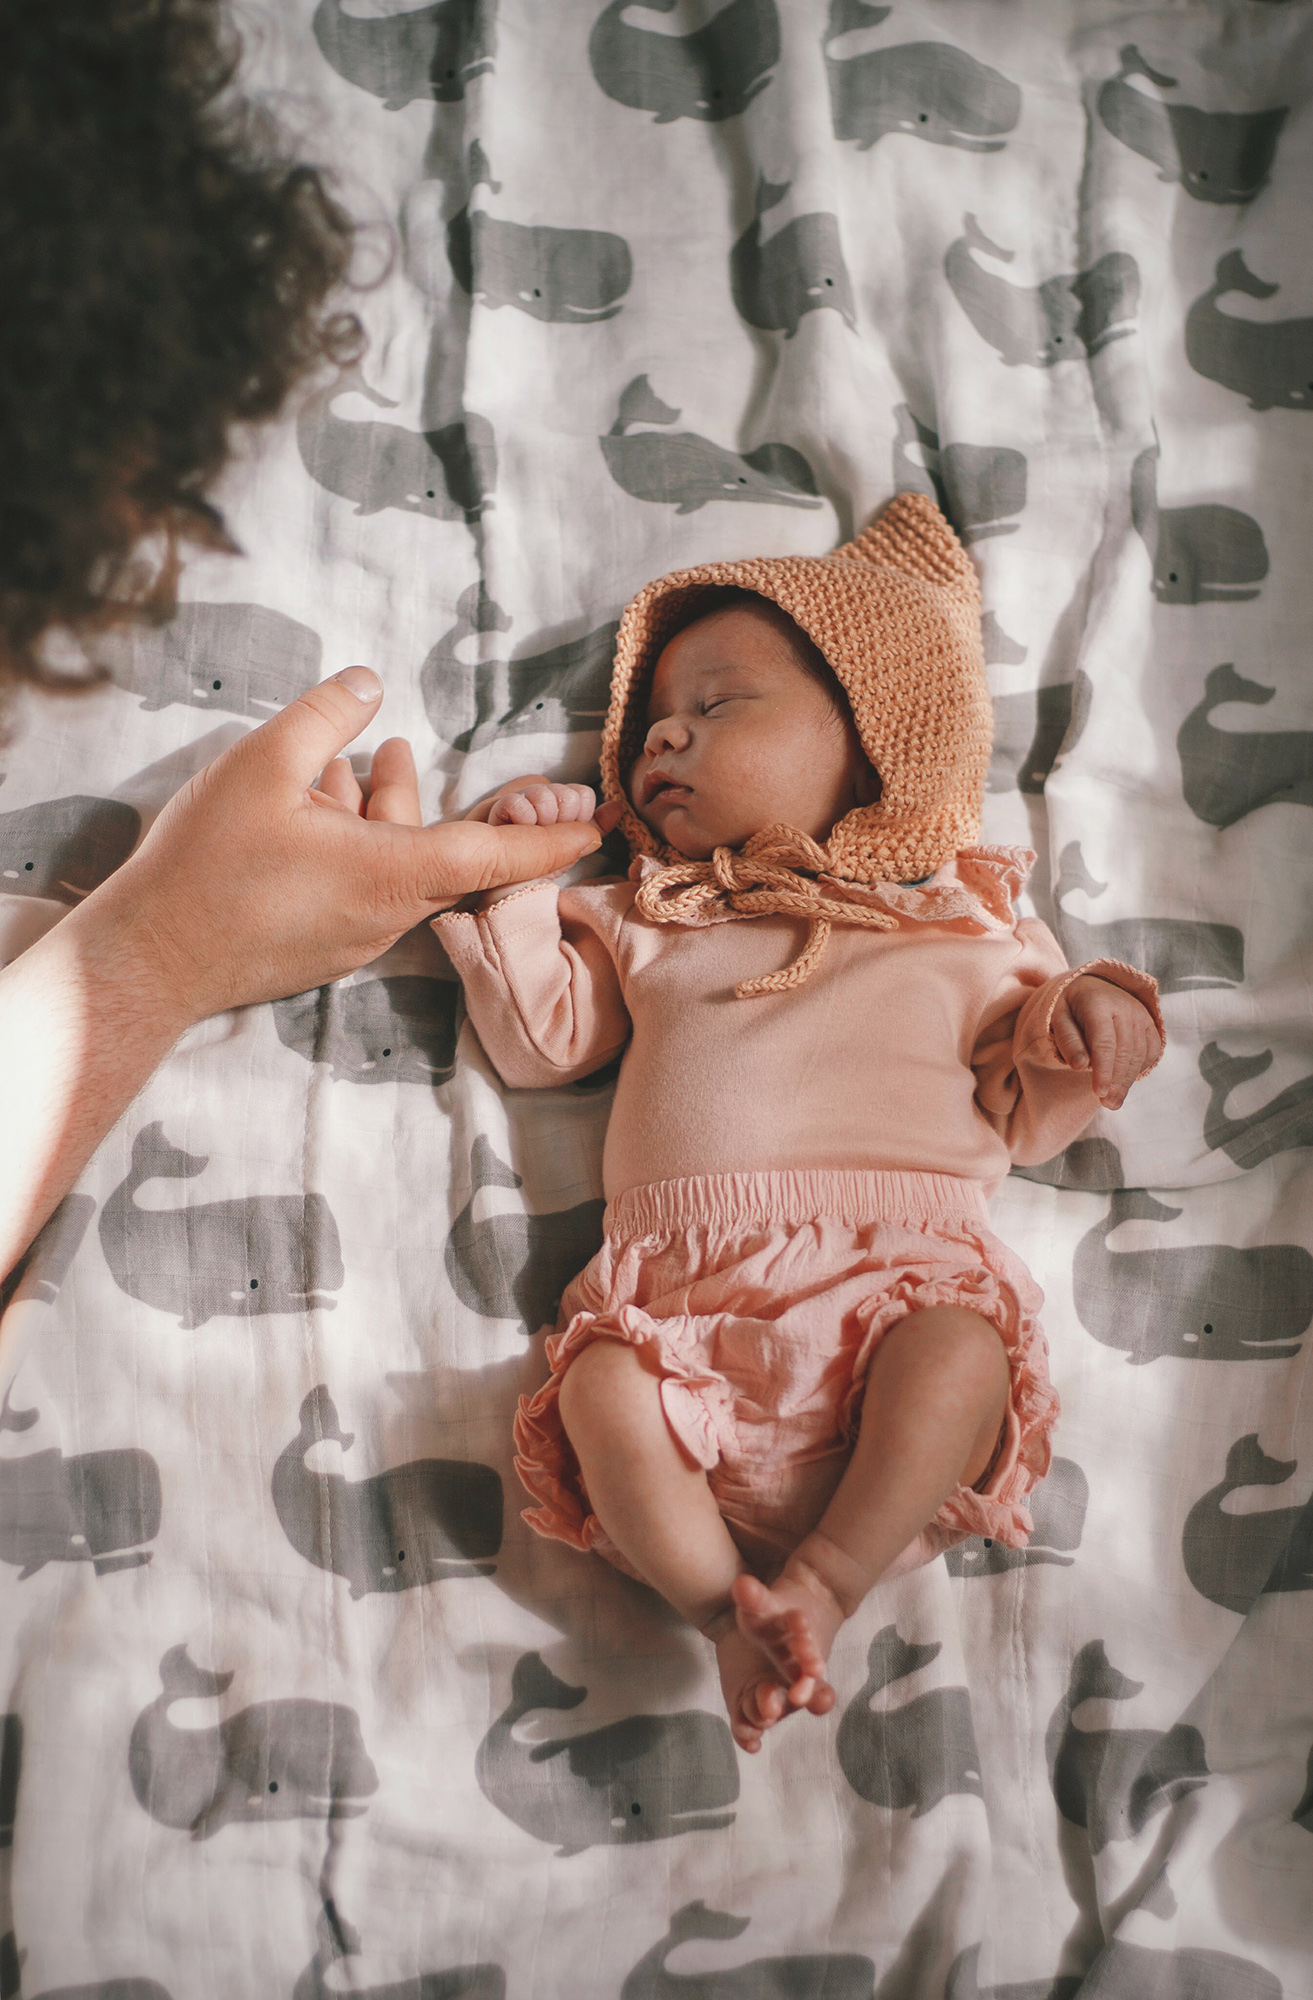 Lila at 10 days. A 10 day old baby wearing a pink bodysuit with a frilly collar, a pink pixie hat,  and pink frilly bloomers lying on a muslin blanket with a grey whale print.